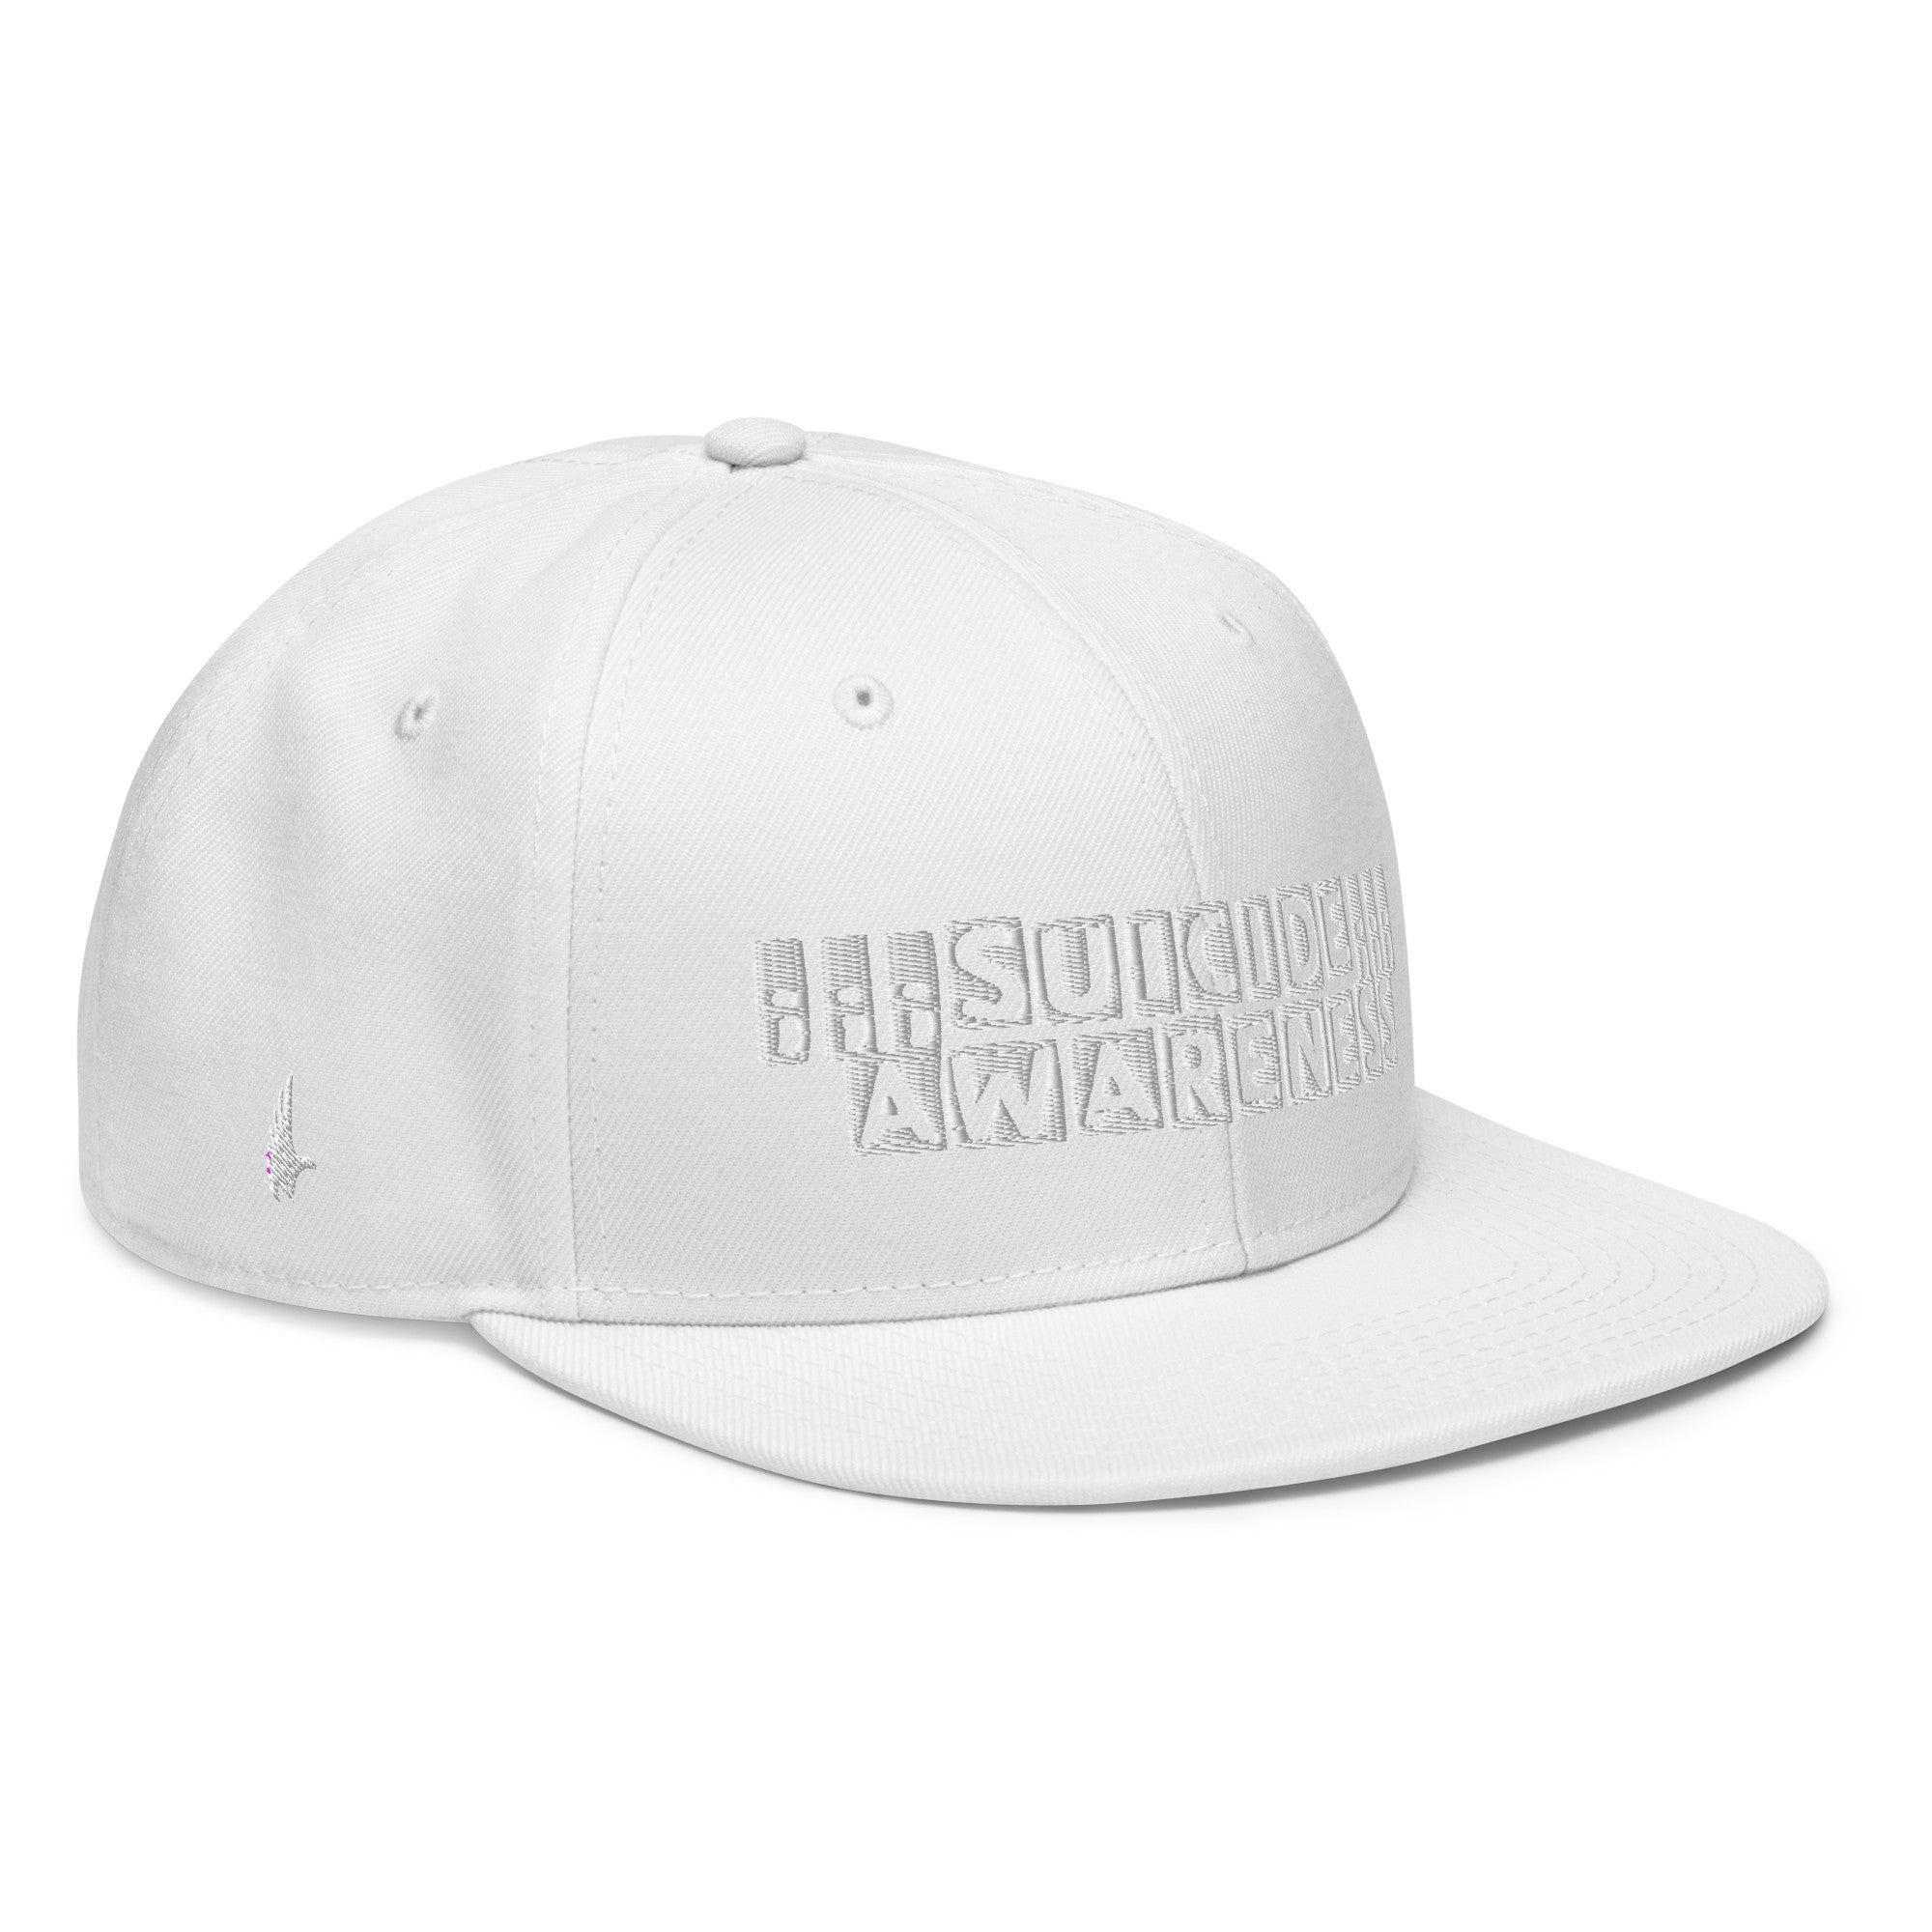 Suicide Awareness Snapback Hat - White Out OS - Loyalty Vibes